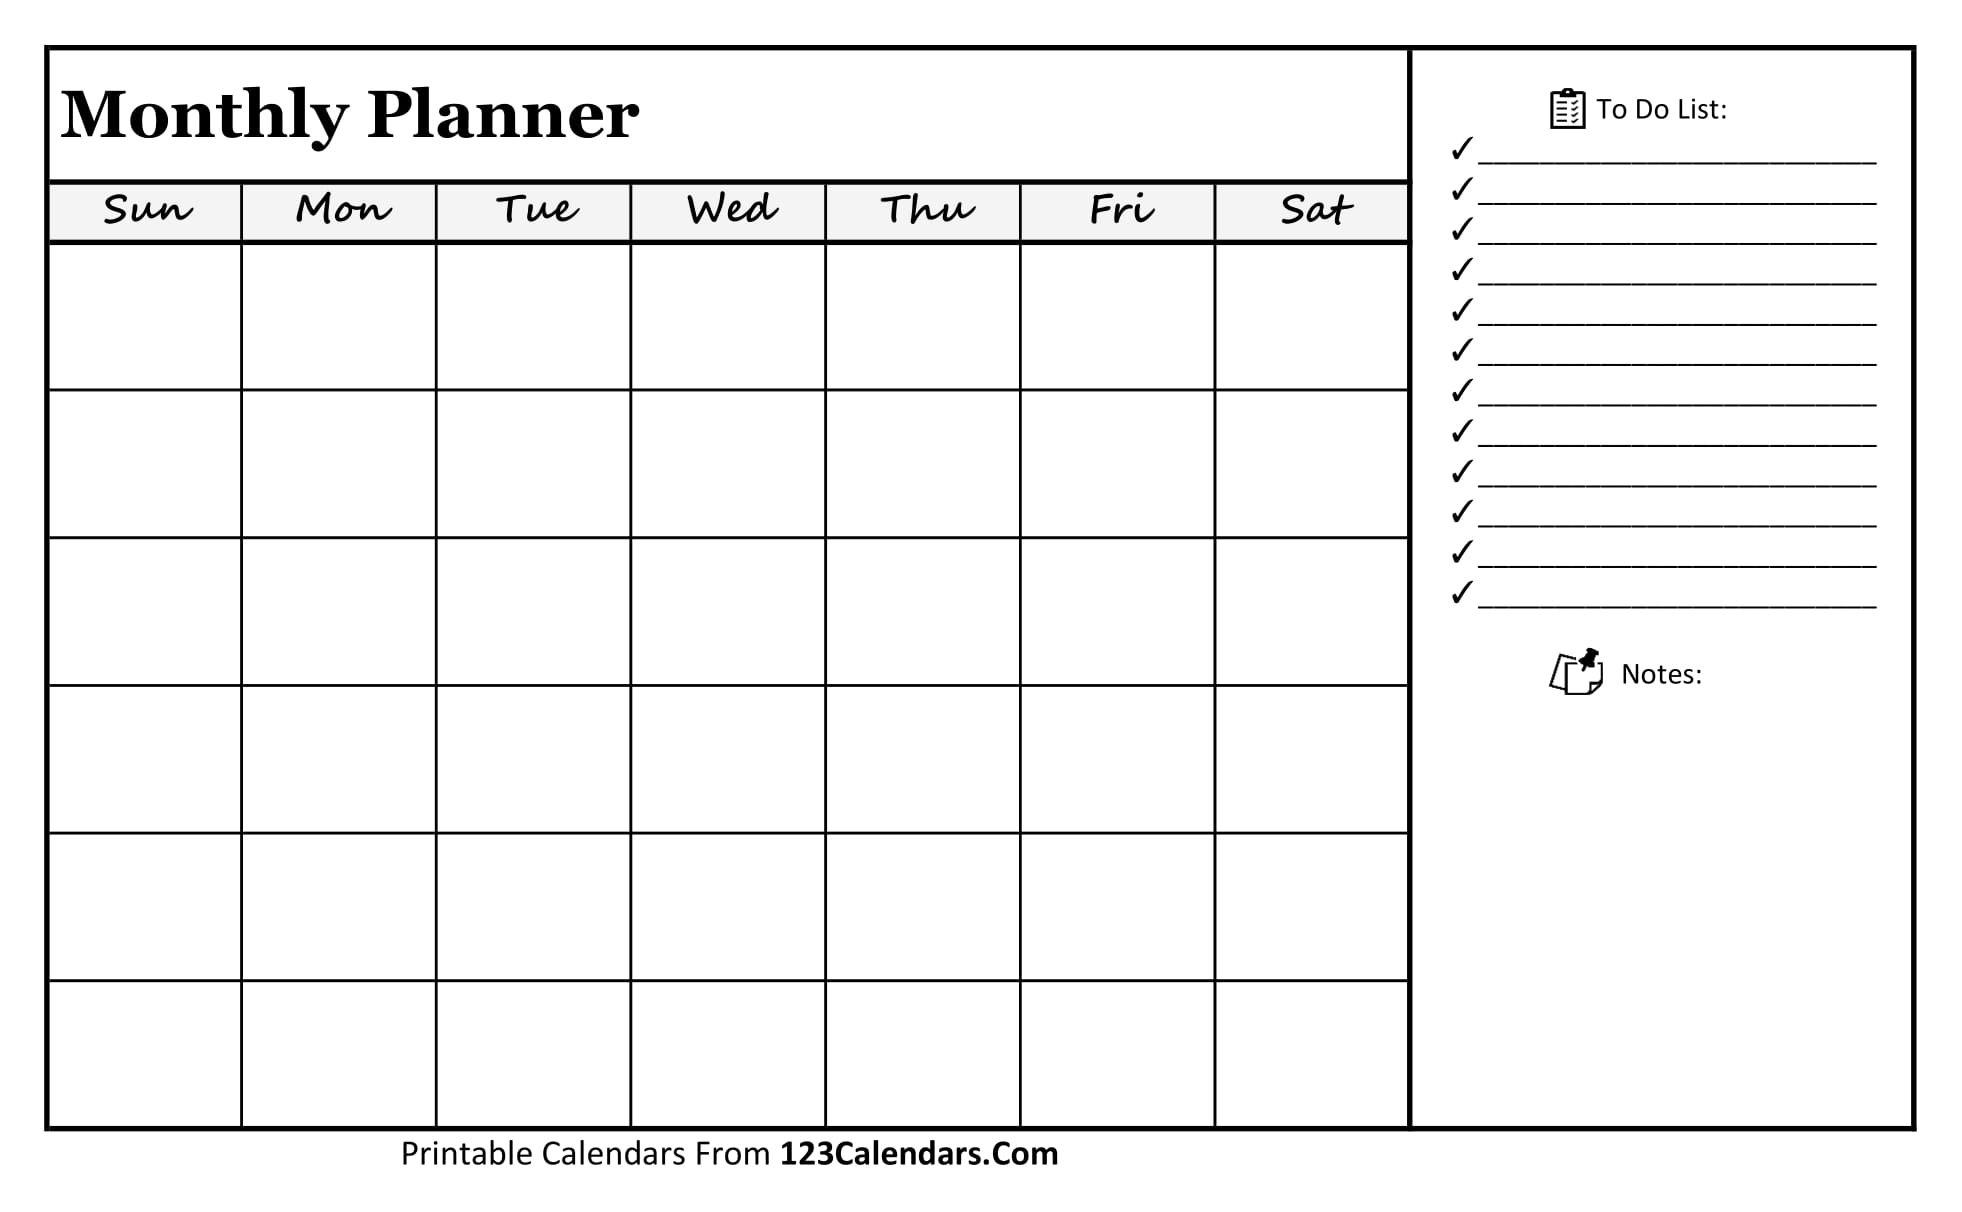 printable-monthly-planner-templates-123calendars